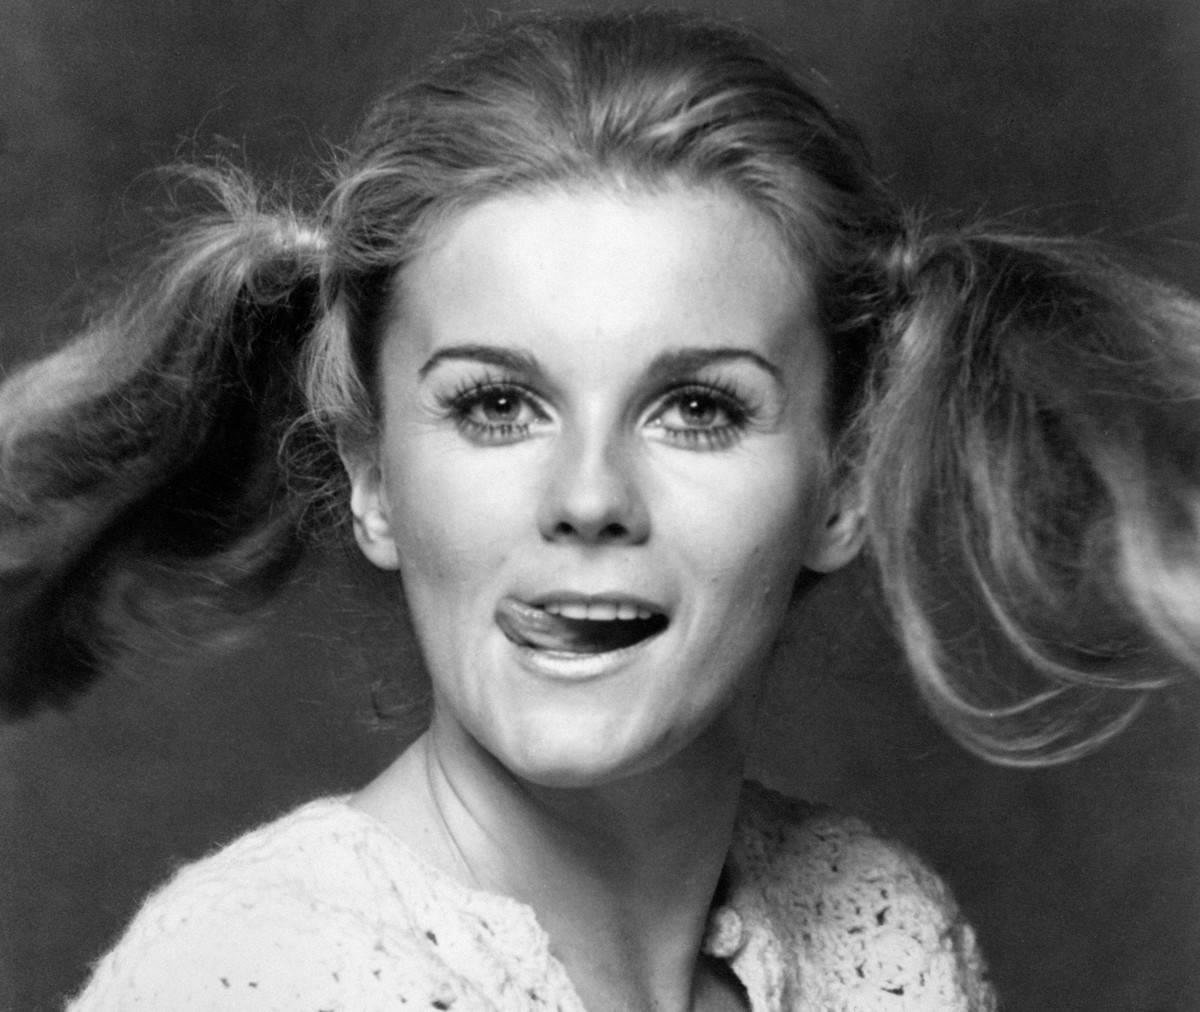 <p>A certified star by 1965, Ann-Margret Being has a career in the entertainment industry that spans over five decades. Starring in films with huge acts such as Elvis in <i>Viva Las Vegas</i> surely helped her rise to fame! </p> <p>But, she didn't seem to let the celebrity status go to her head. As we can see in this beautiful black and white photograph, Ann-Margret Being still had time to goof off in front of the camera!</p>